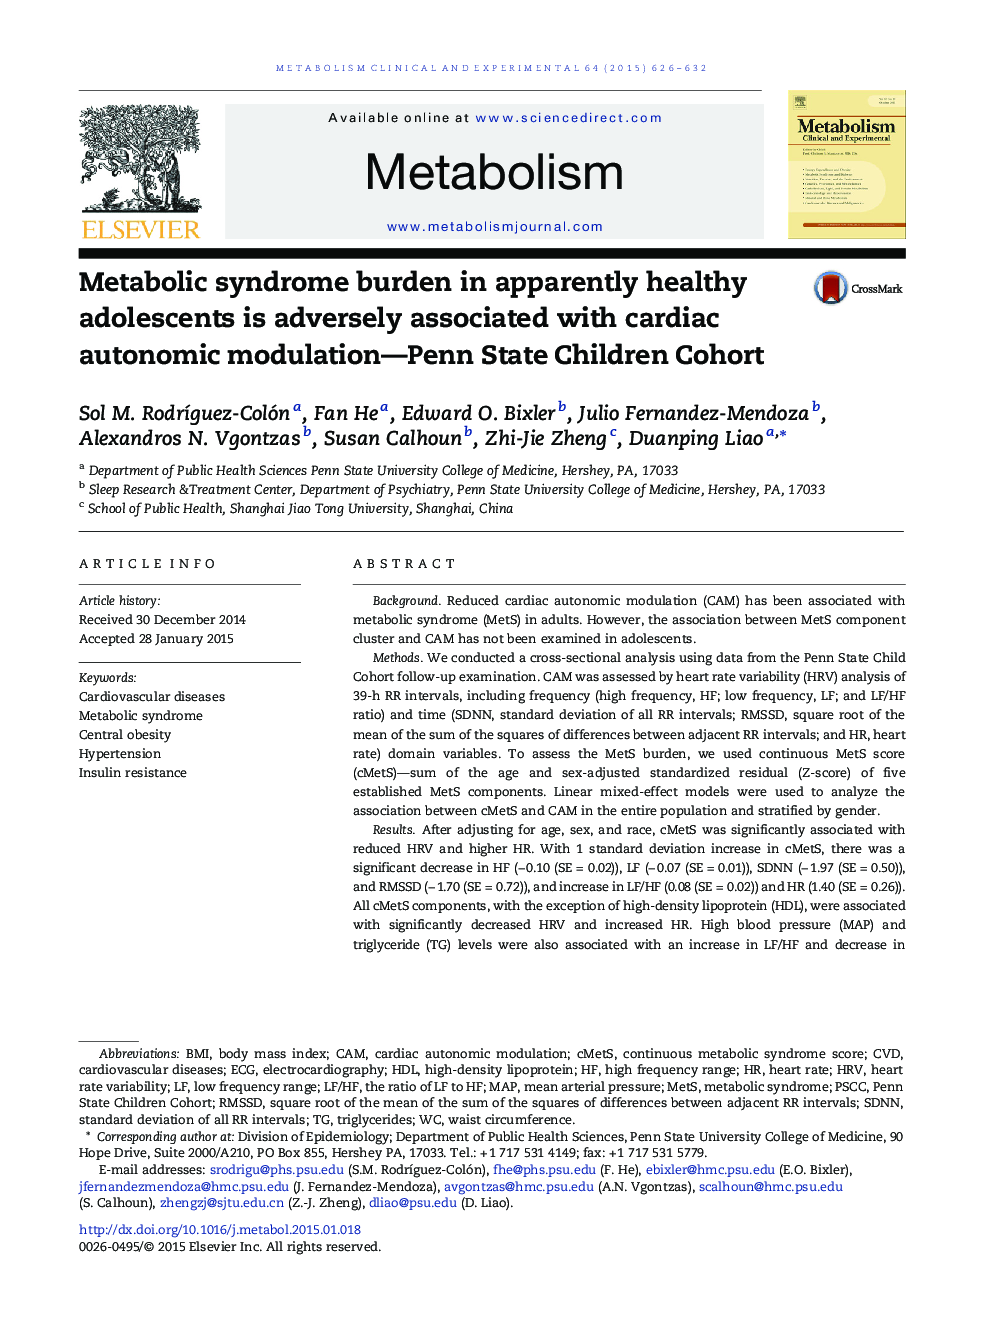 Metabolic syndrome burden in apparently healthy adolescents is adversely associated with cardiac autonomic modulation—Penn State Children Cohort